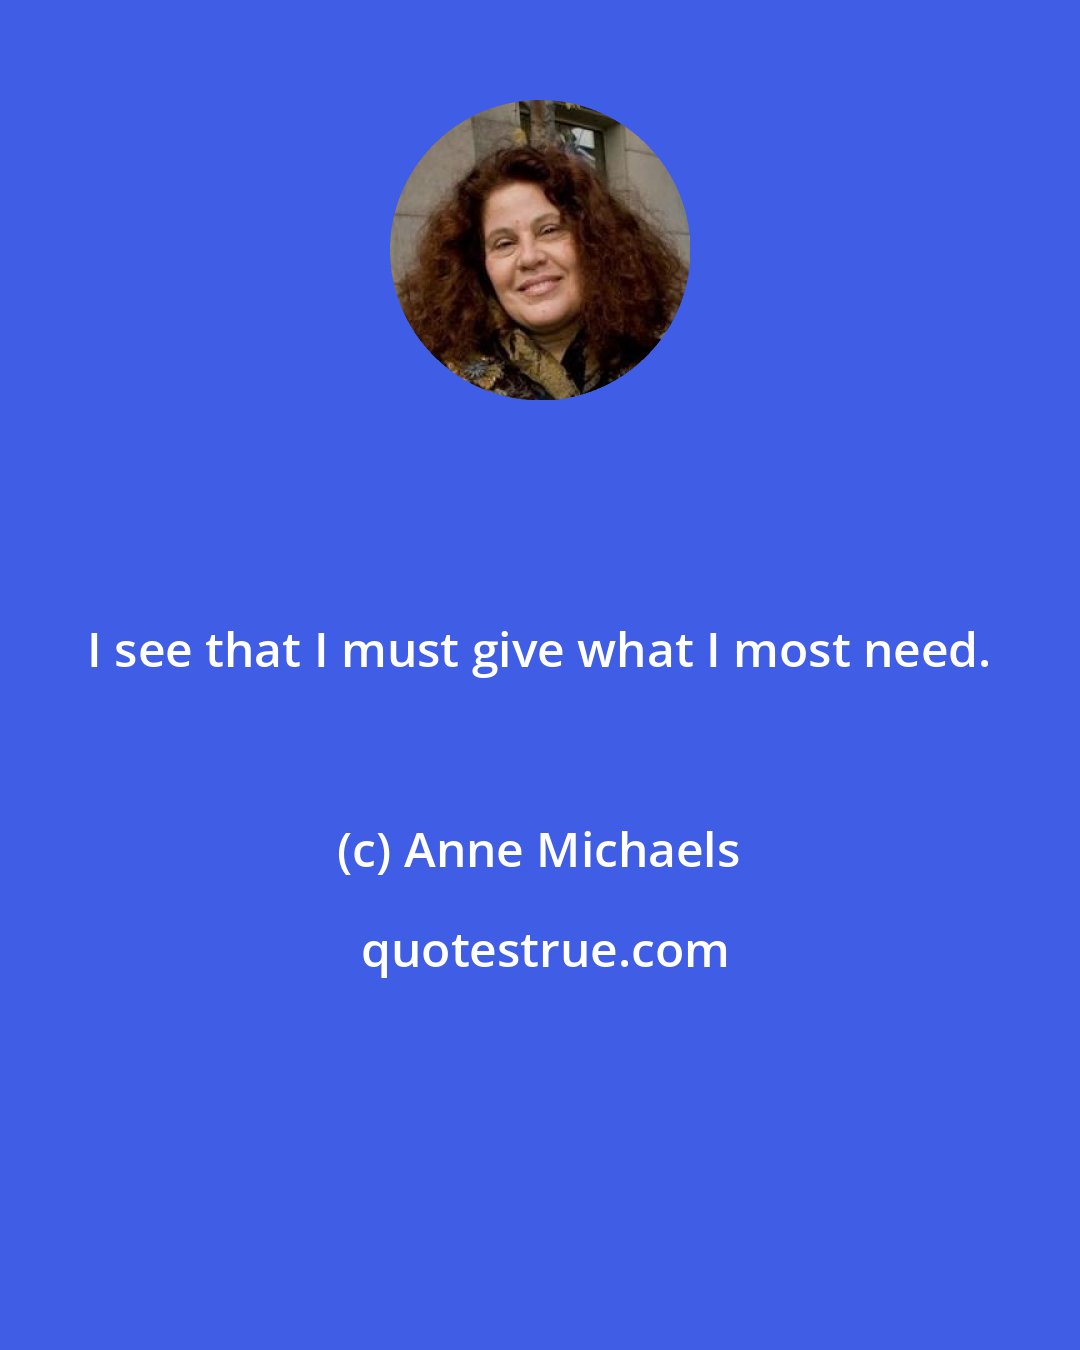 Anne Michaels: I see that I must give what I most need.